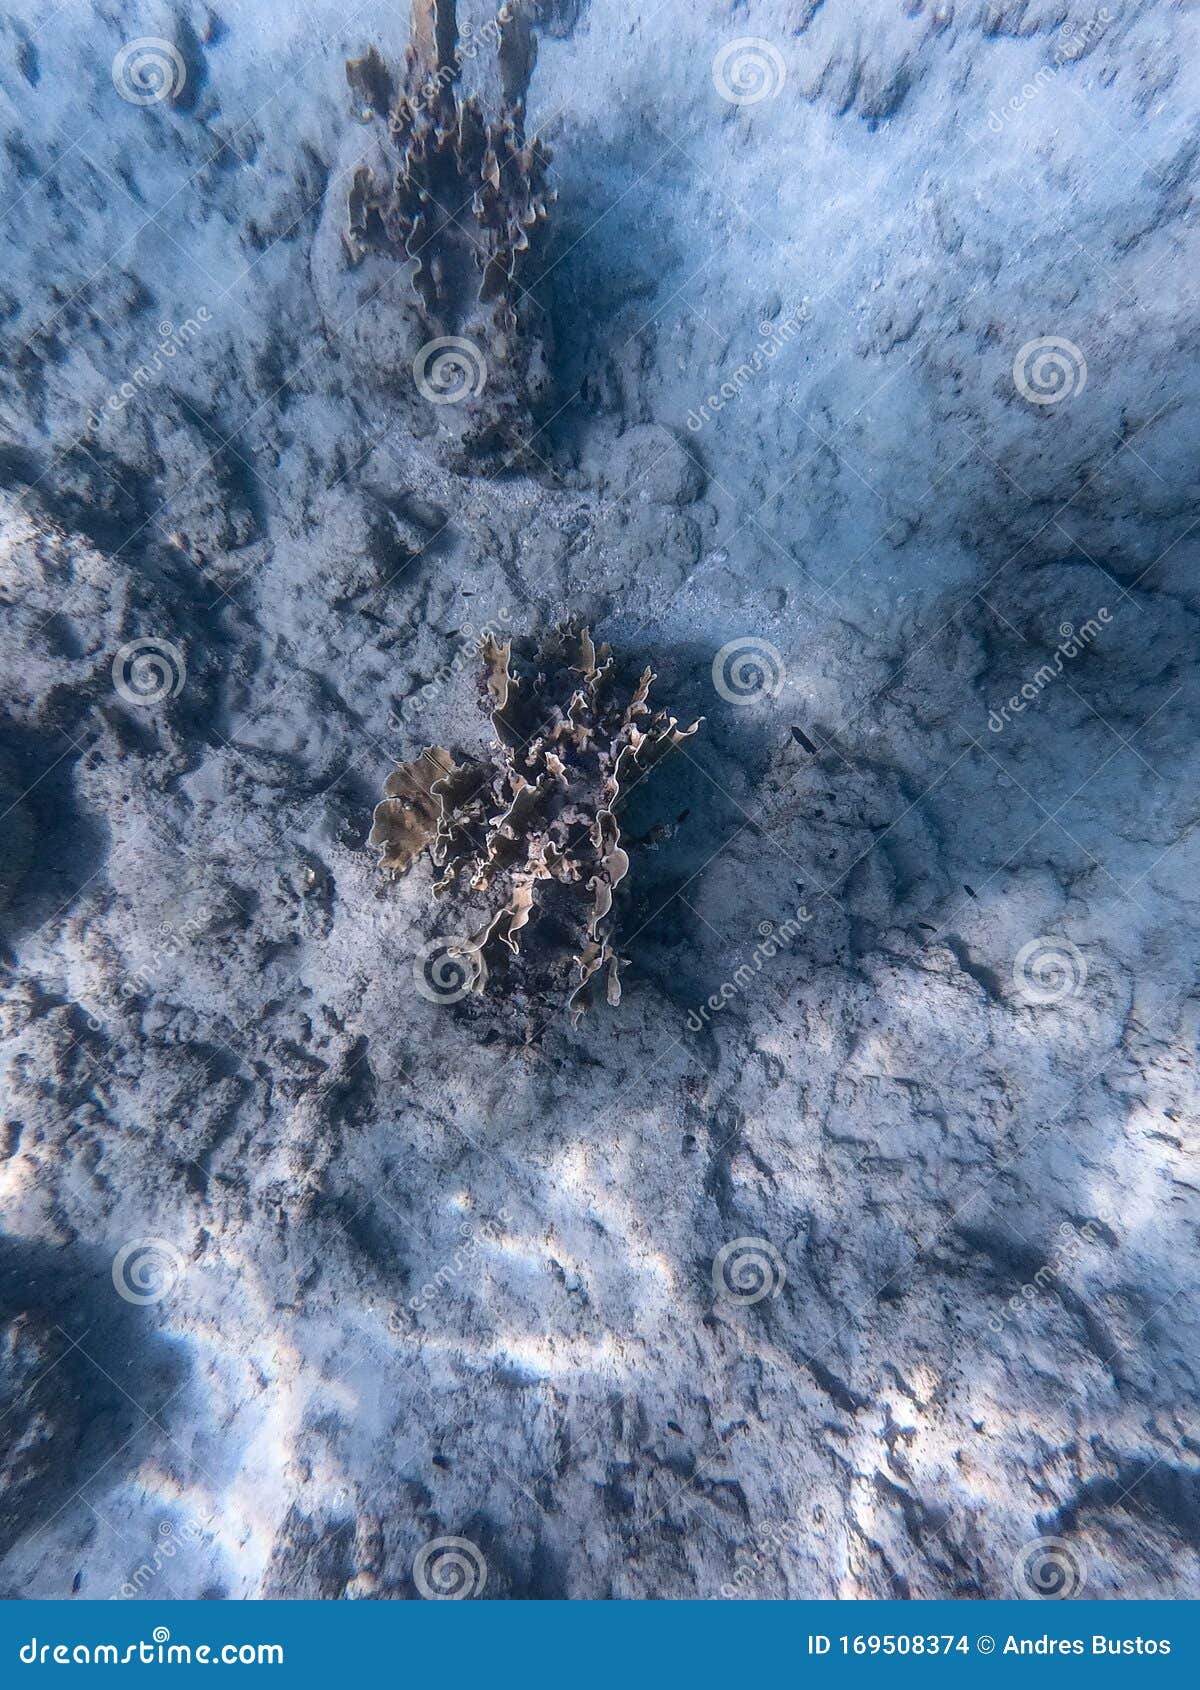 lonely coral at the bottom of blue sea